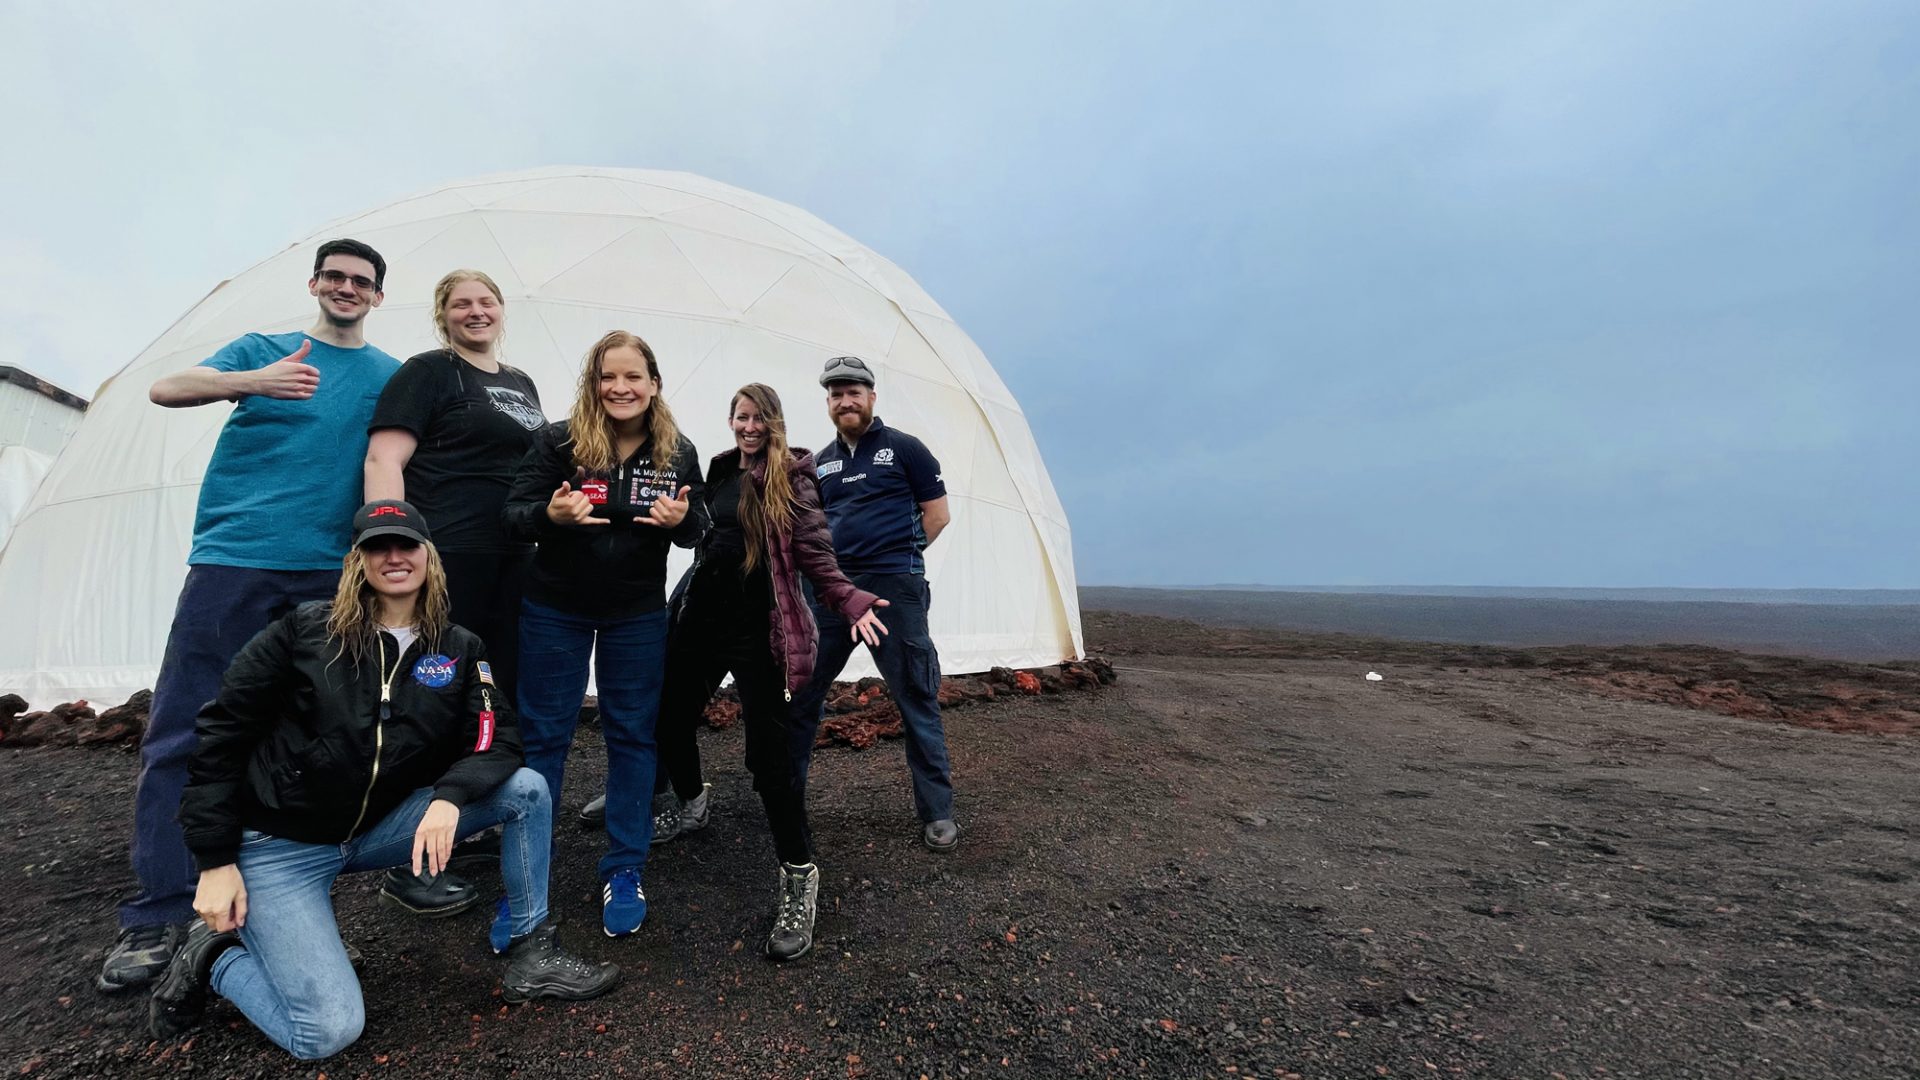 Contemporary crew arrives in Hawaii for mock Mars mission — Commander’s file: sol 2